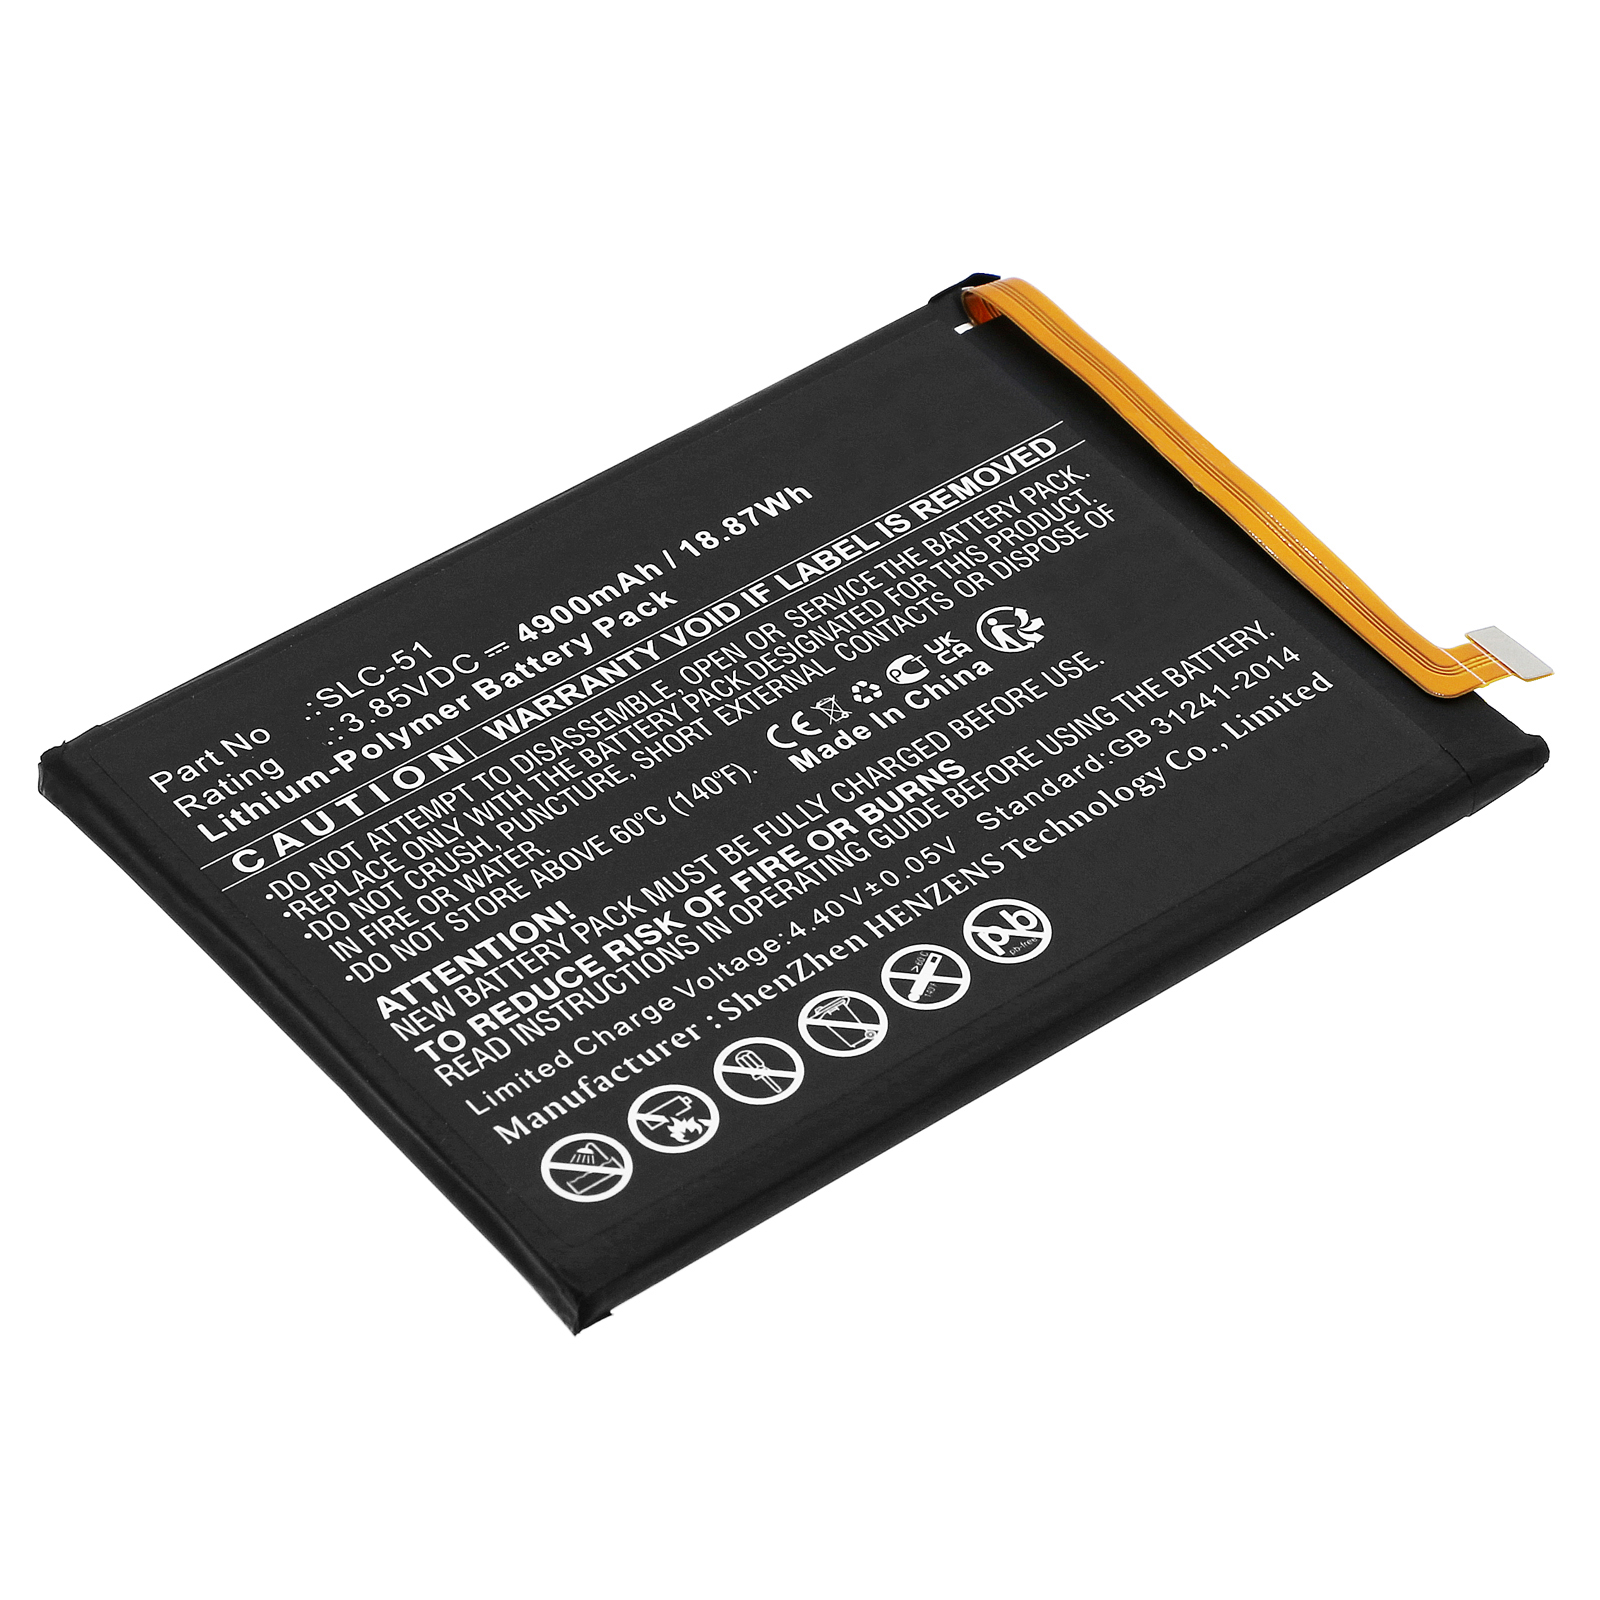 Synergy Digital Cell Phone Battery, Compatible with Samsung SLC-51 Cell Phone Battery (Li-Pol, 3.85V, 4900mAh)